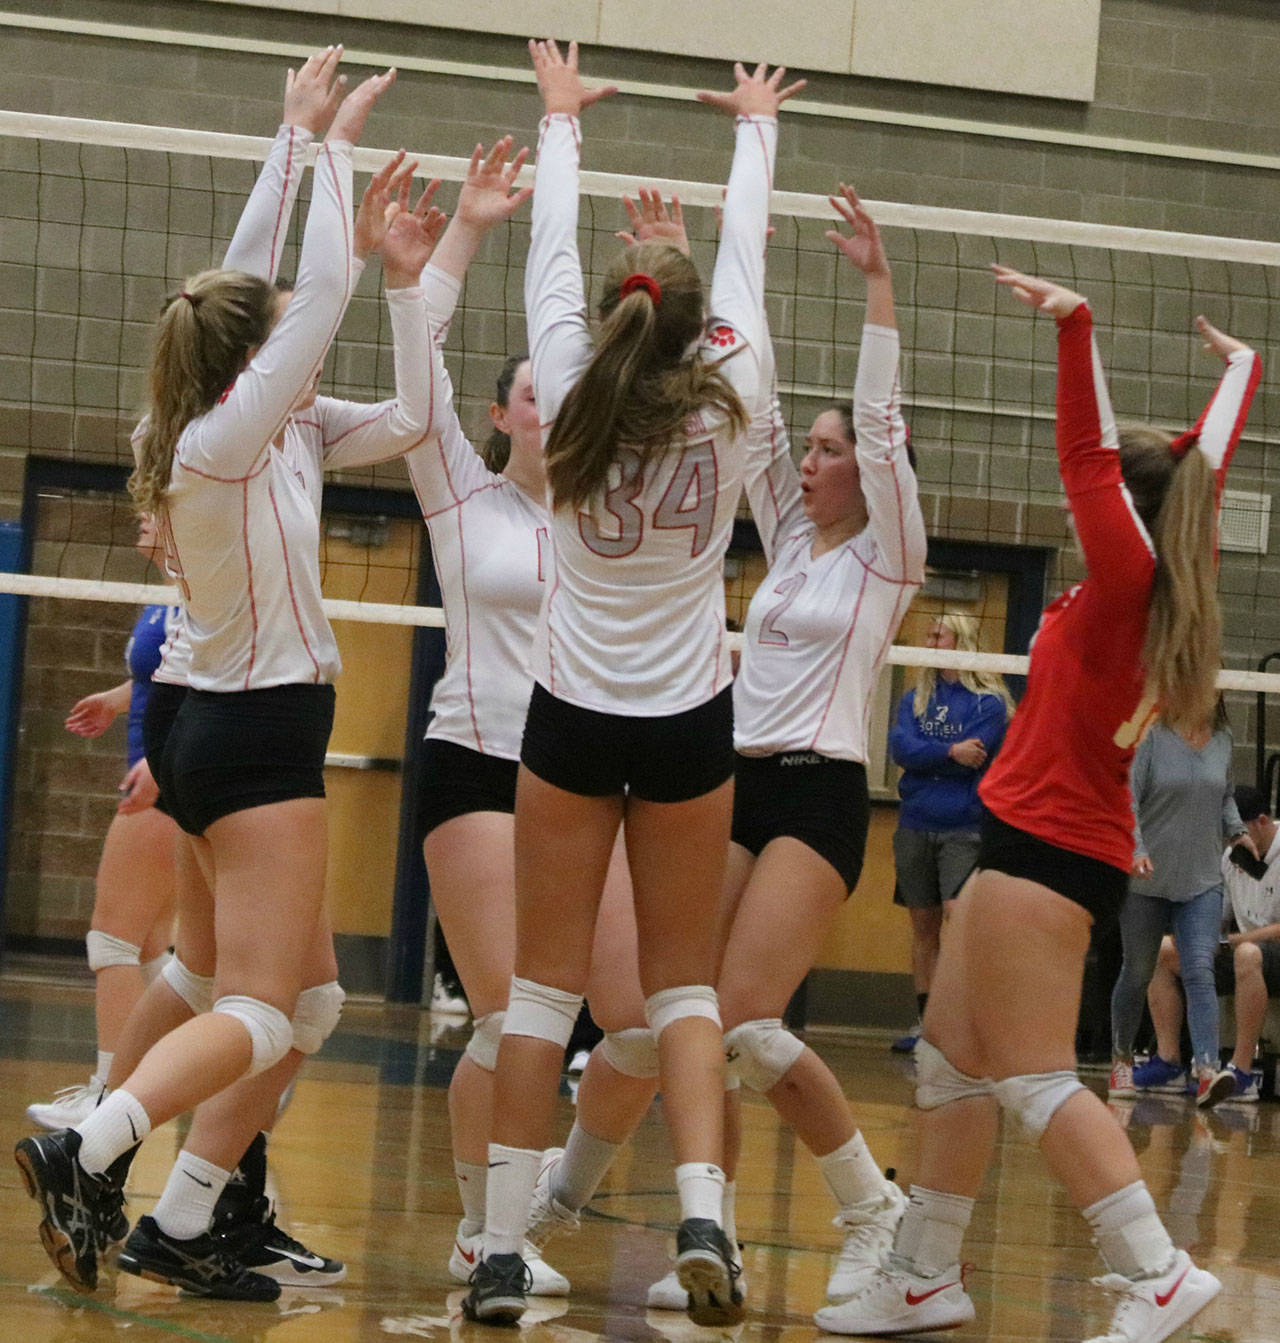 Mount Si volleyball players celebrate a point against Bothell. Andy Nystrom / staff photo